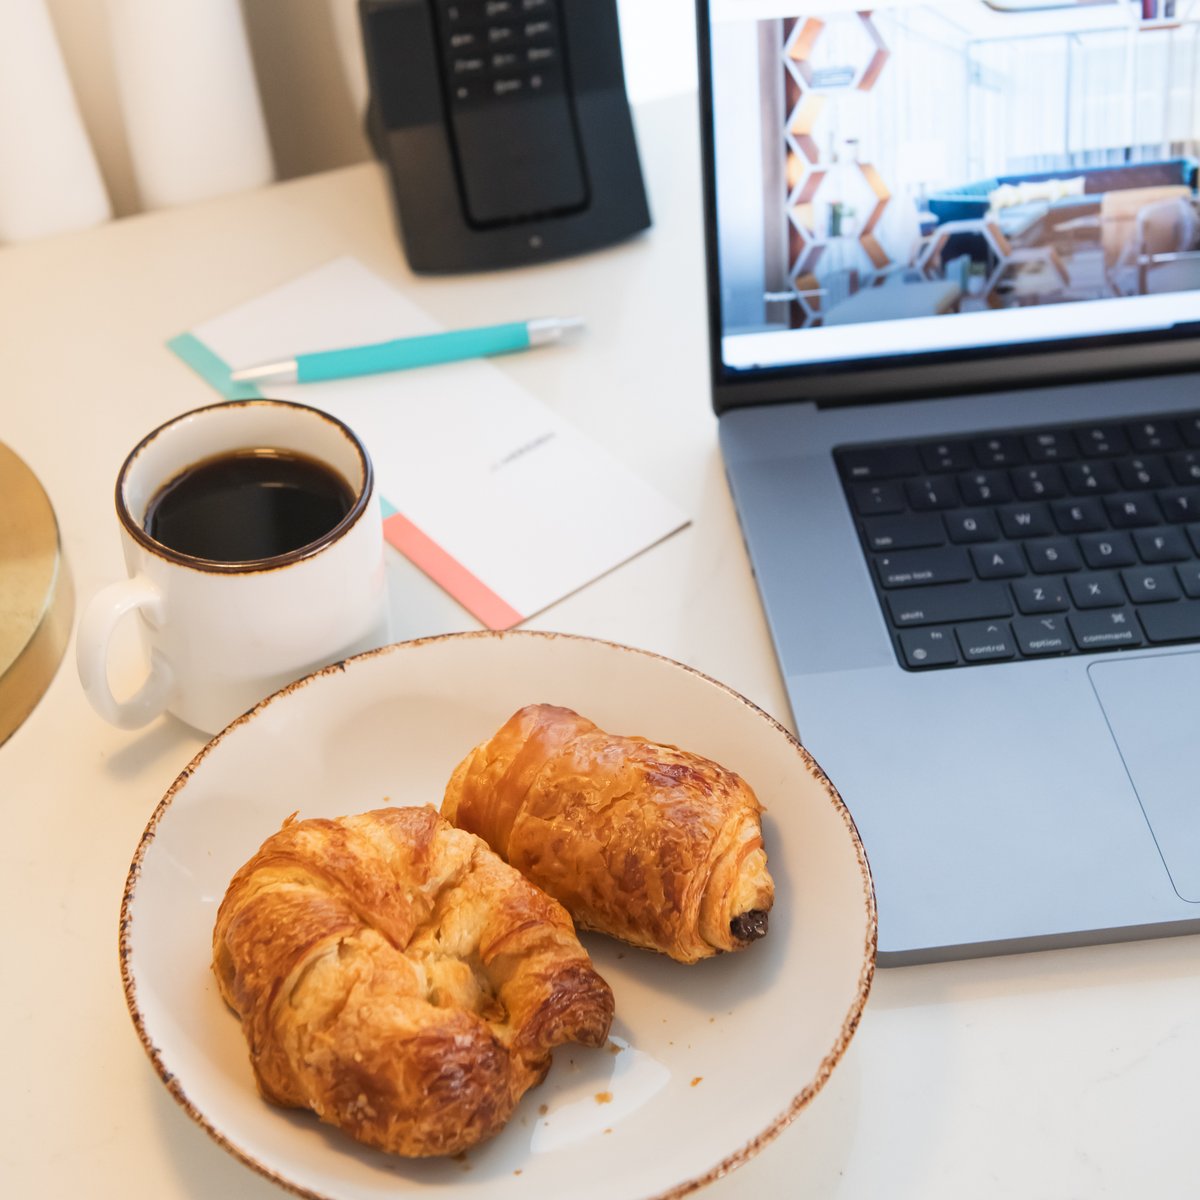 Squeezing in a bit of work before the holiday weekend? We have you covered with wifi, coffee, and pastries! Room service is here for YOU!